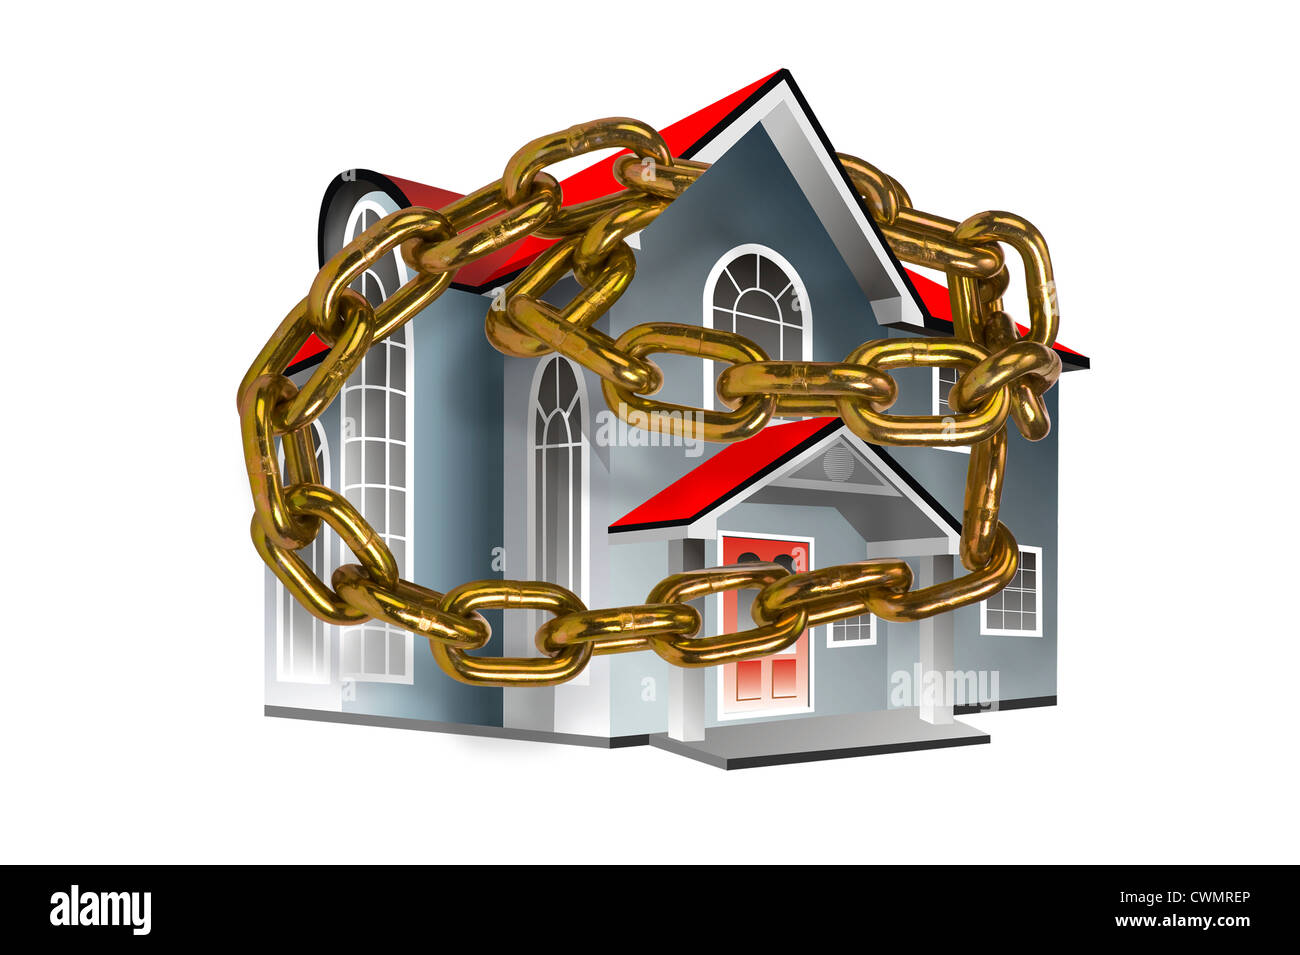 Home in Chains. Stock Photo